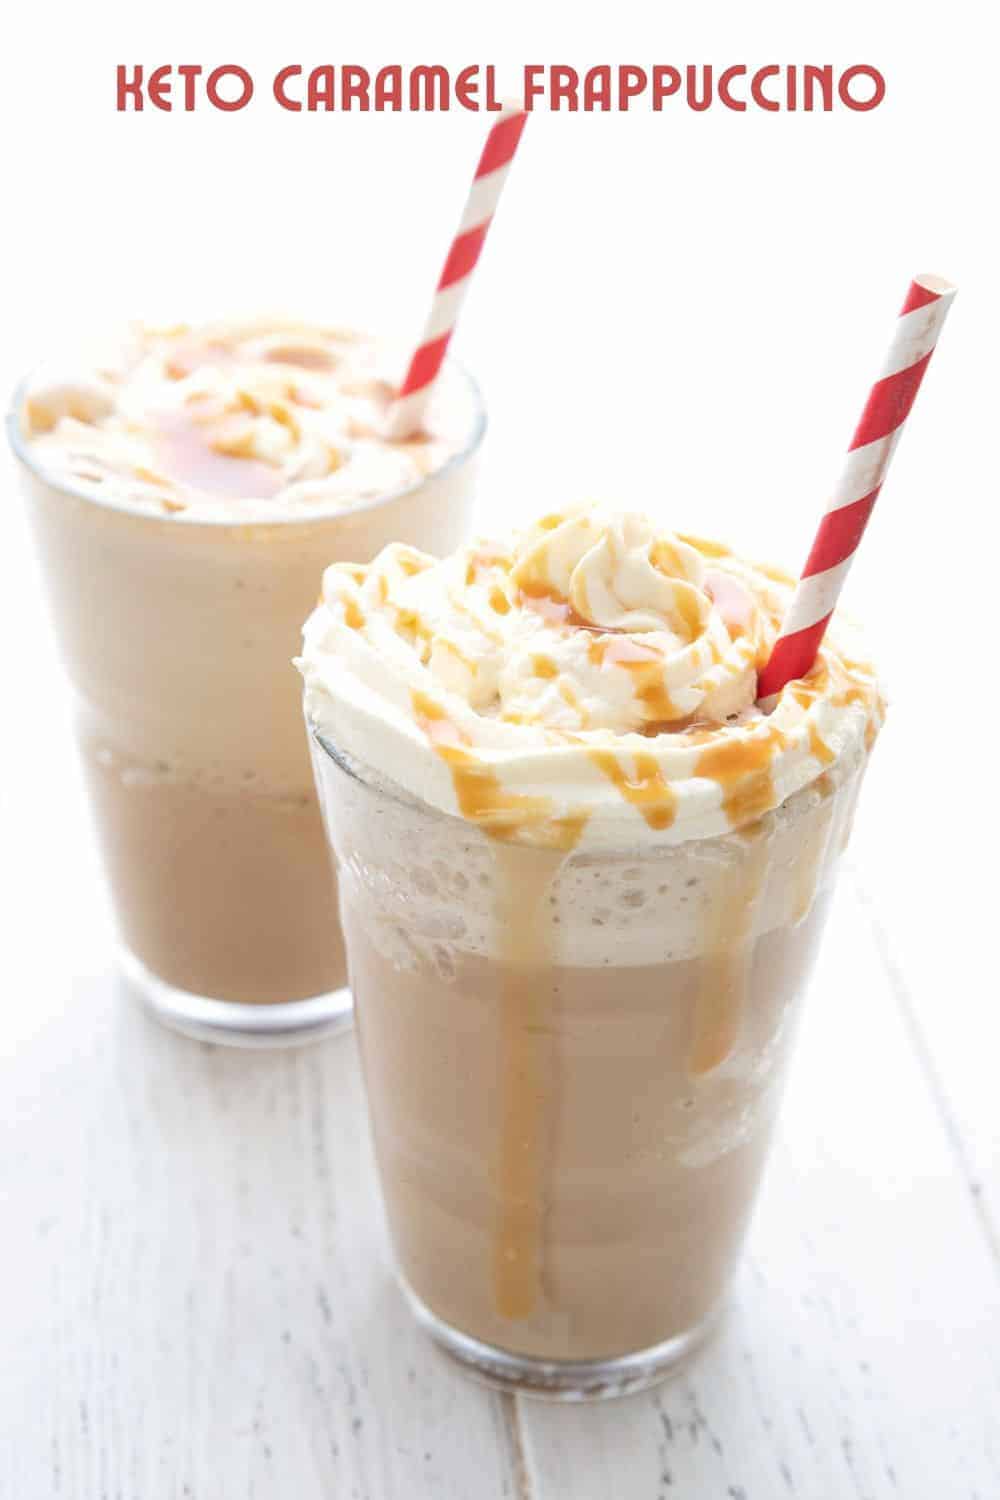 Frosty Caramel Cappuccino Recipe: How to Make It